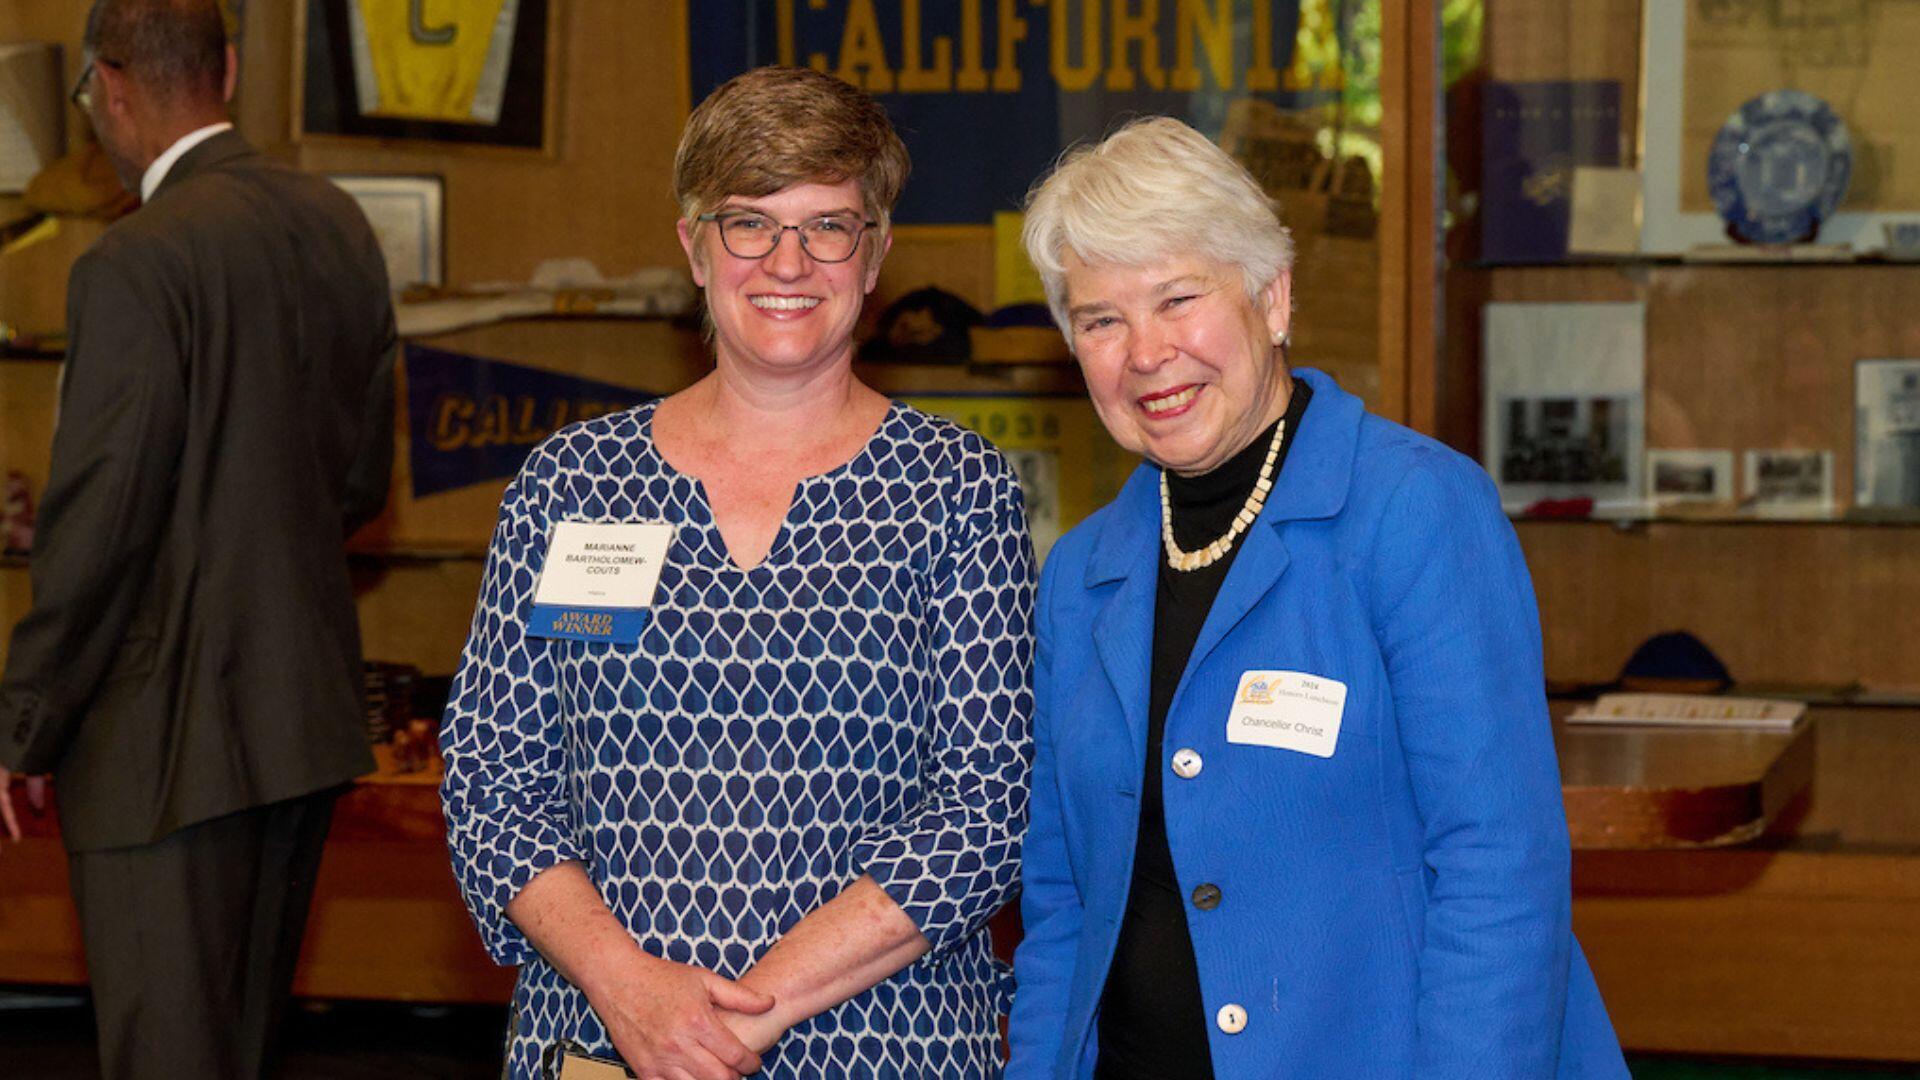 Director of Administration Marianne Bartholomew-Couts with Chancellor Carol Christ